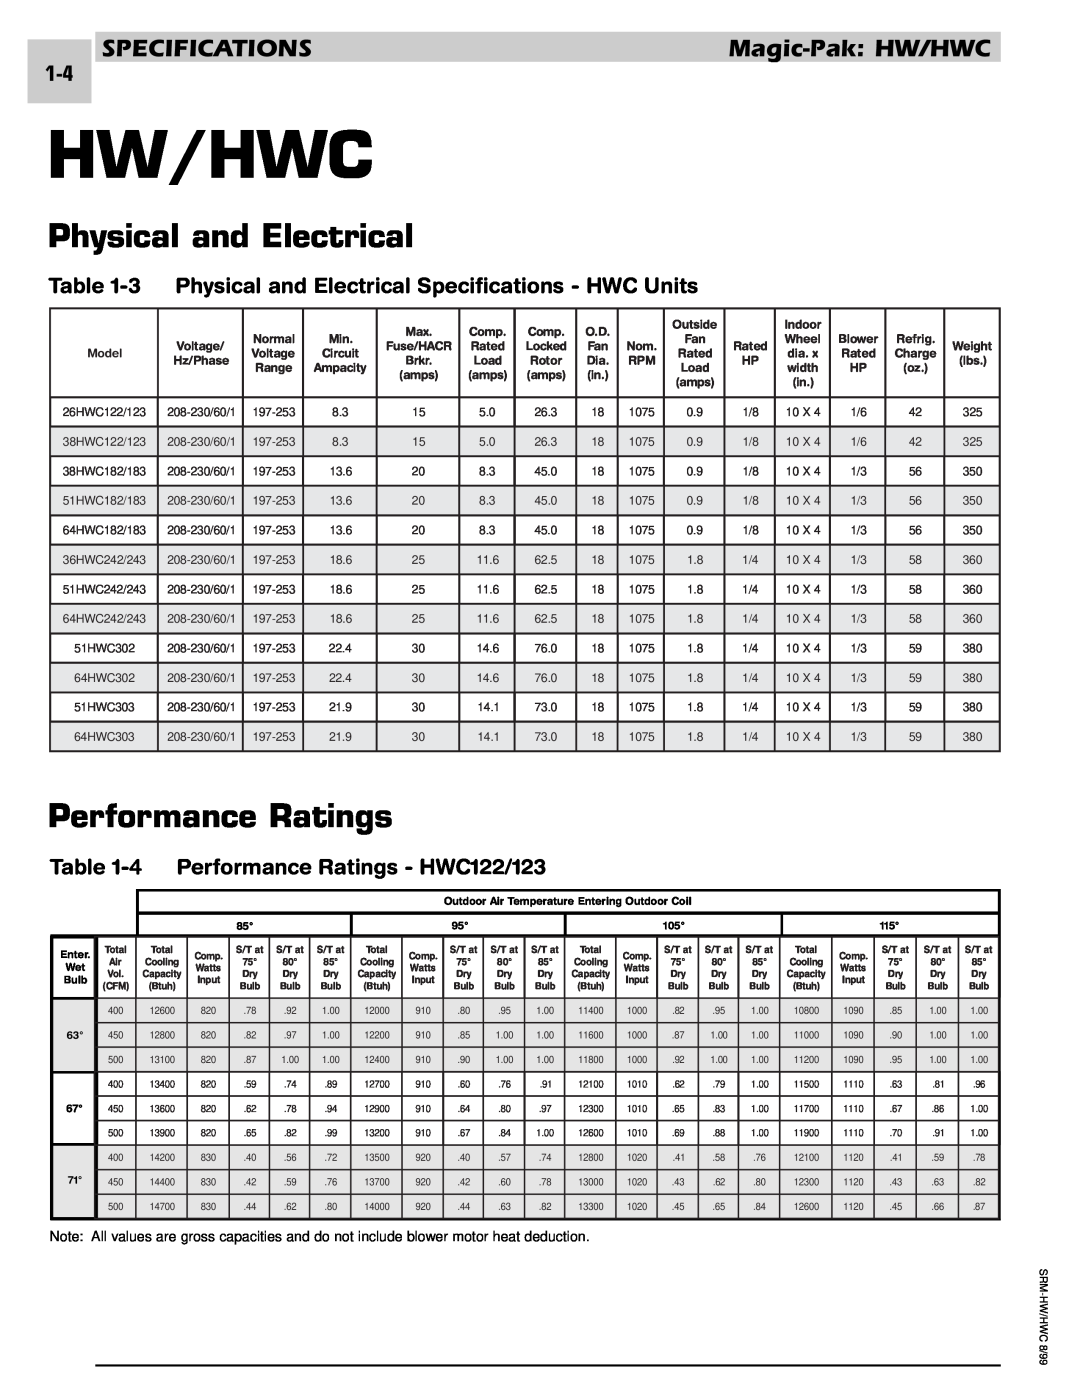 Armstrong World Industries 183, 243, 302, 242, 122, 123, 203, 182 manual Hw/Hwc, Physical and Electrical, Performance Ratings 